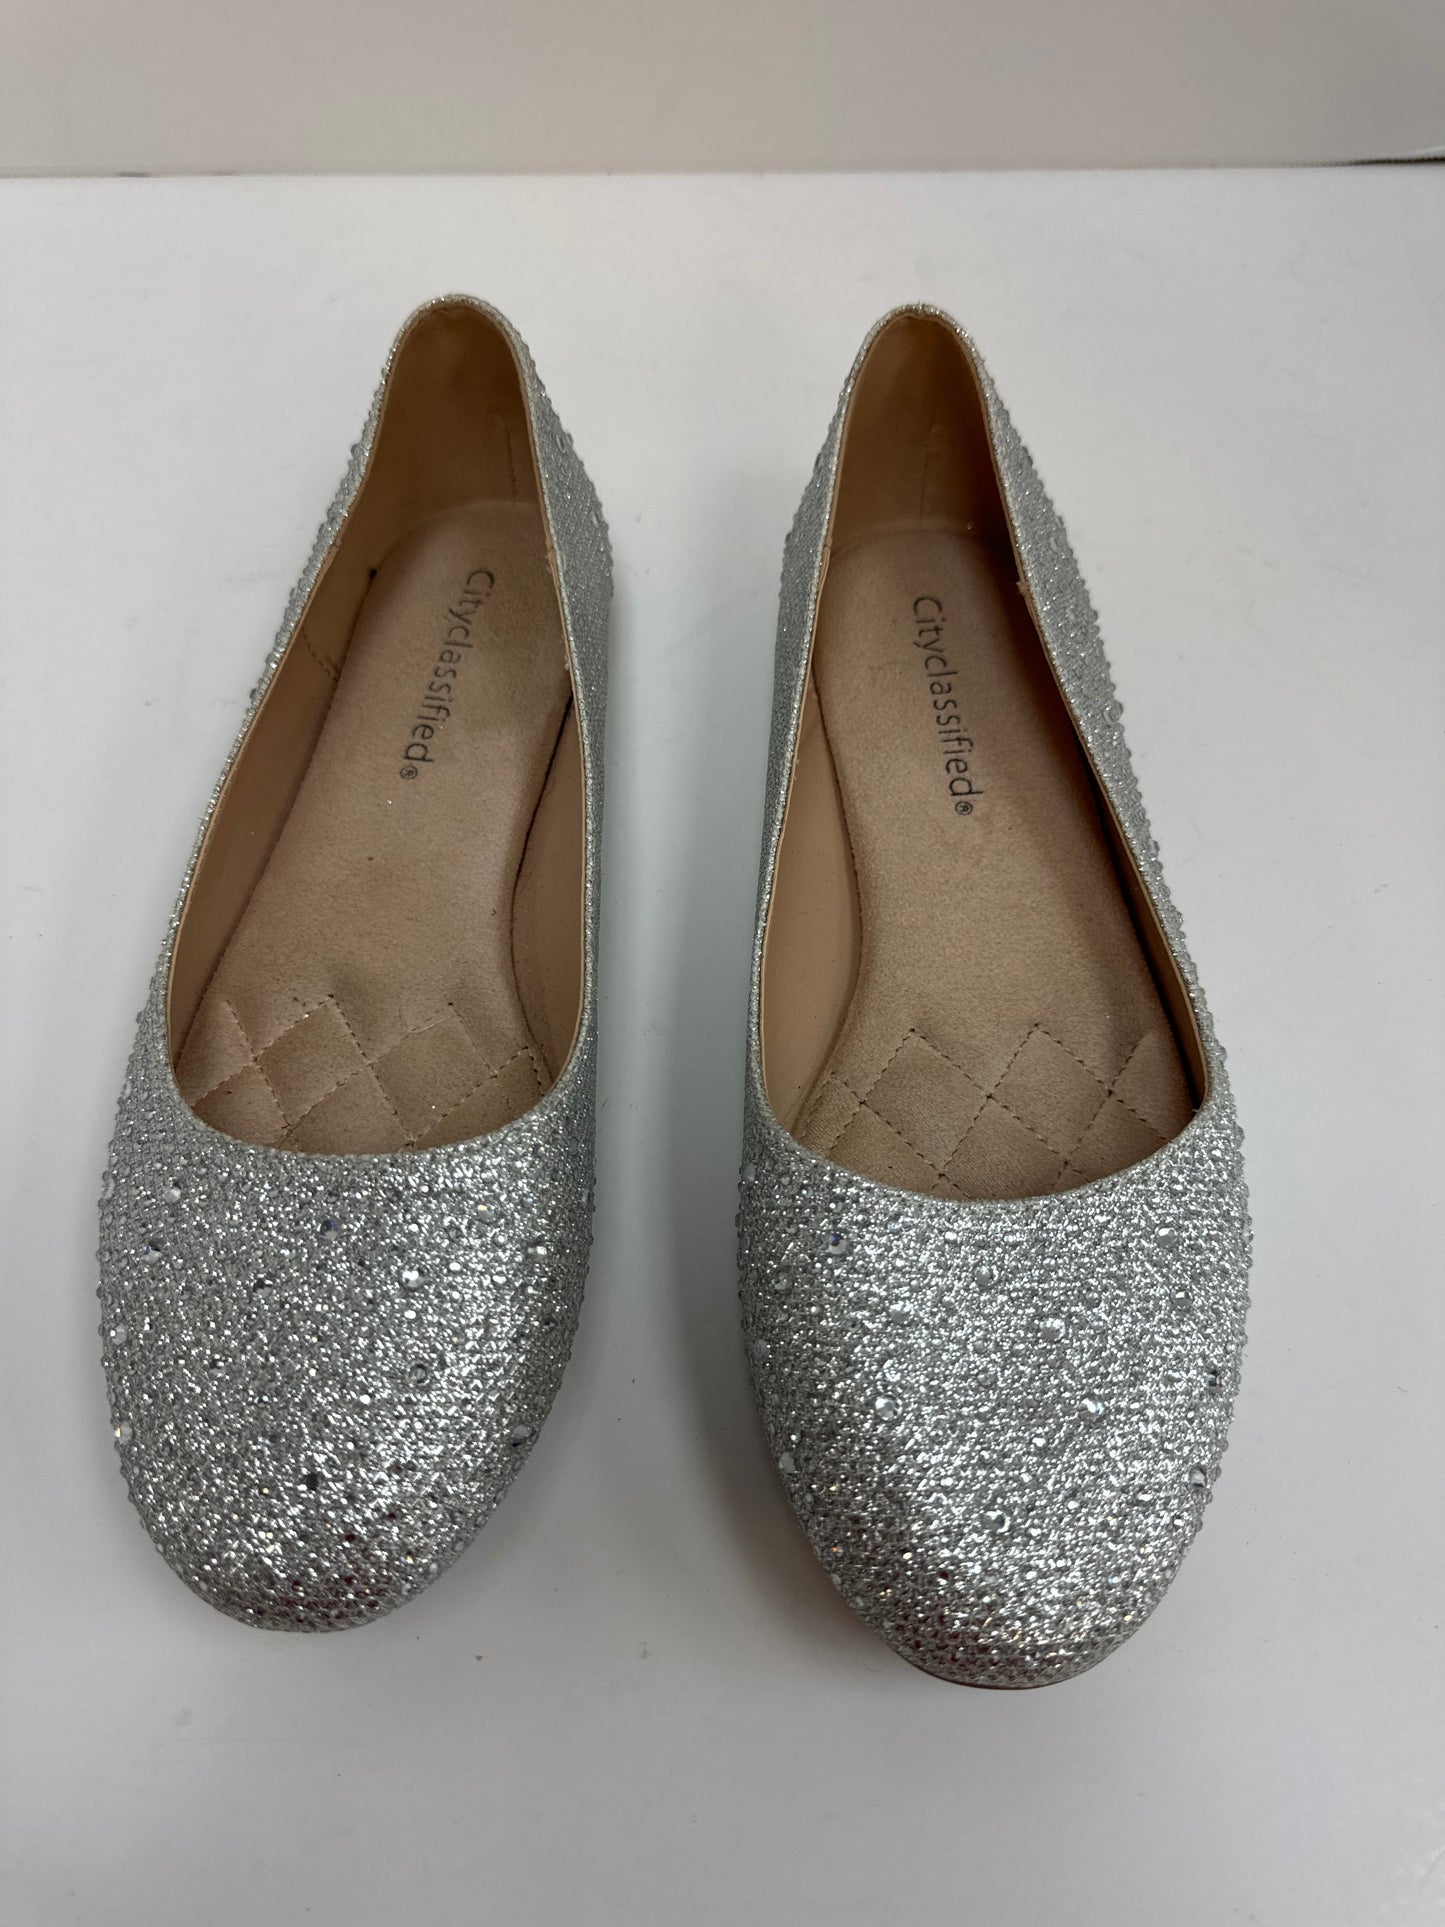 Shoes Flats By City Classified  Size: 7.5